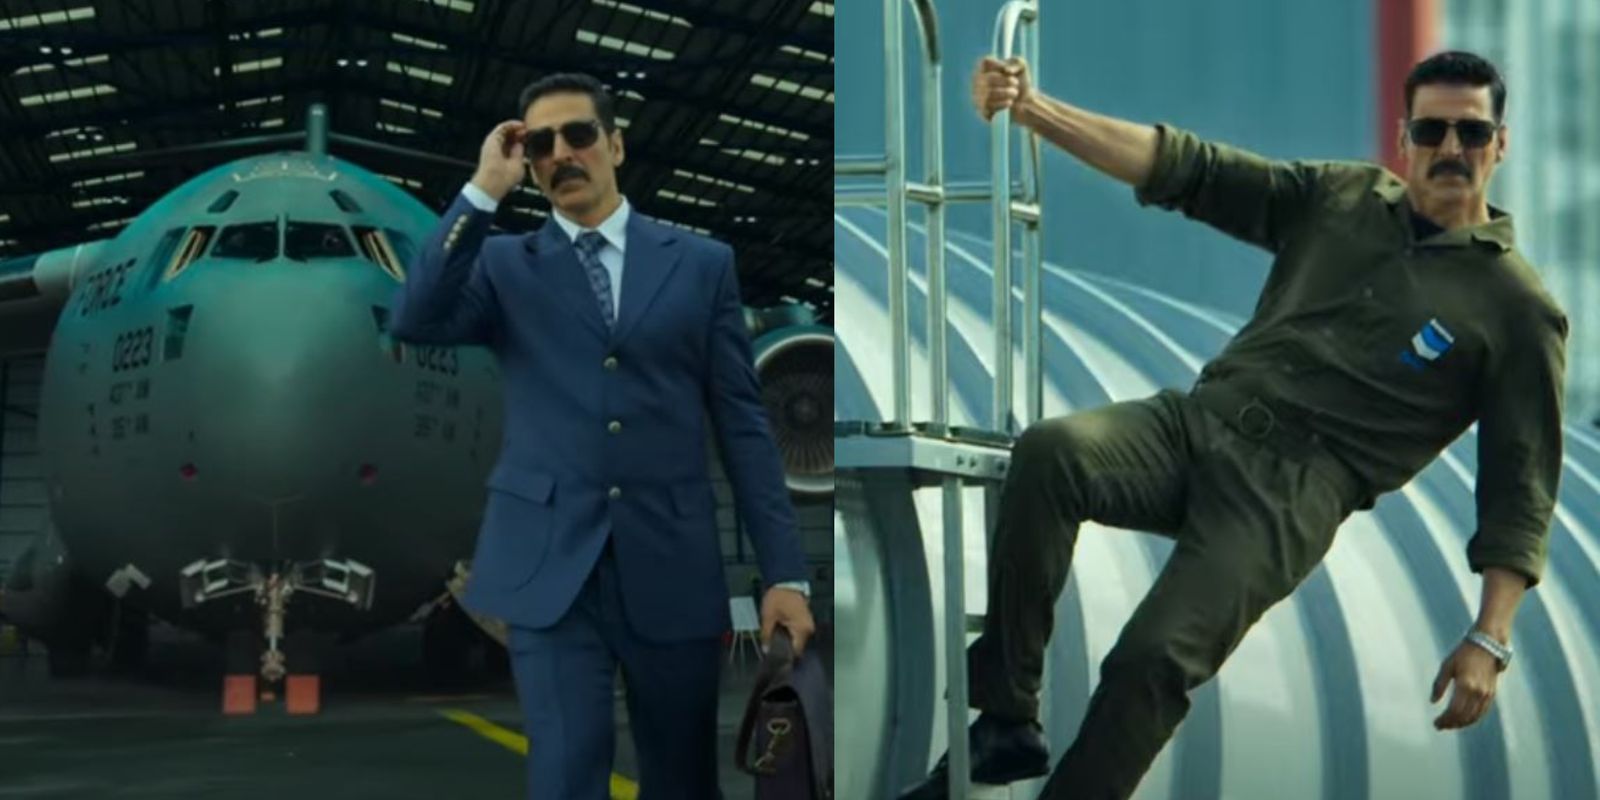 Bell Bottom Teaser Is All About Akshay Kumar's Look And Swag, With A Plane In The Background